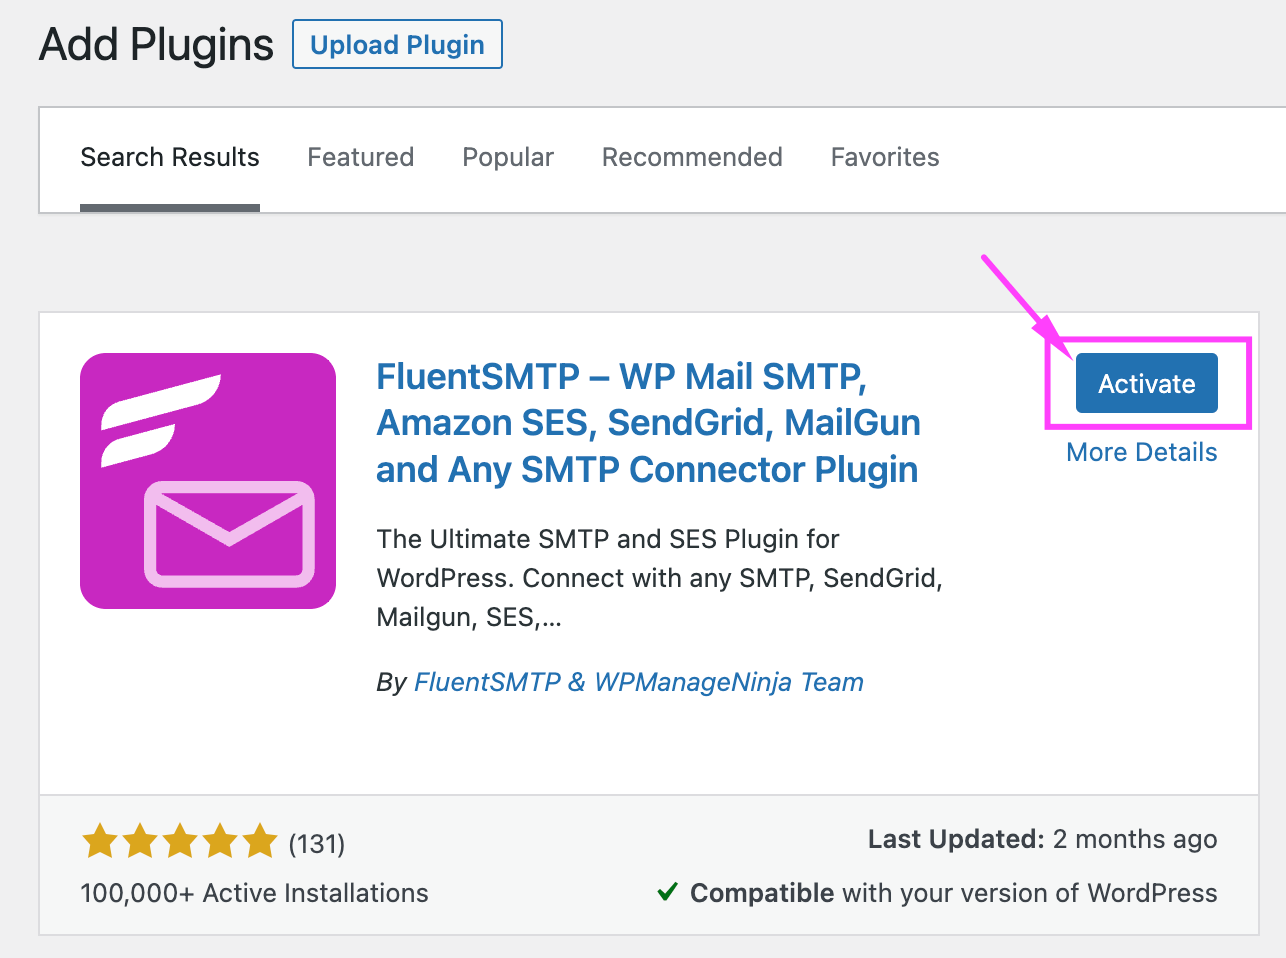 Plugins categorized as ses